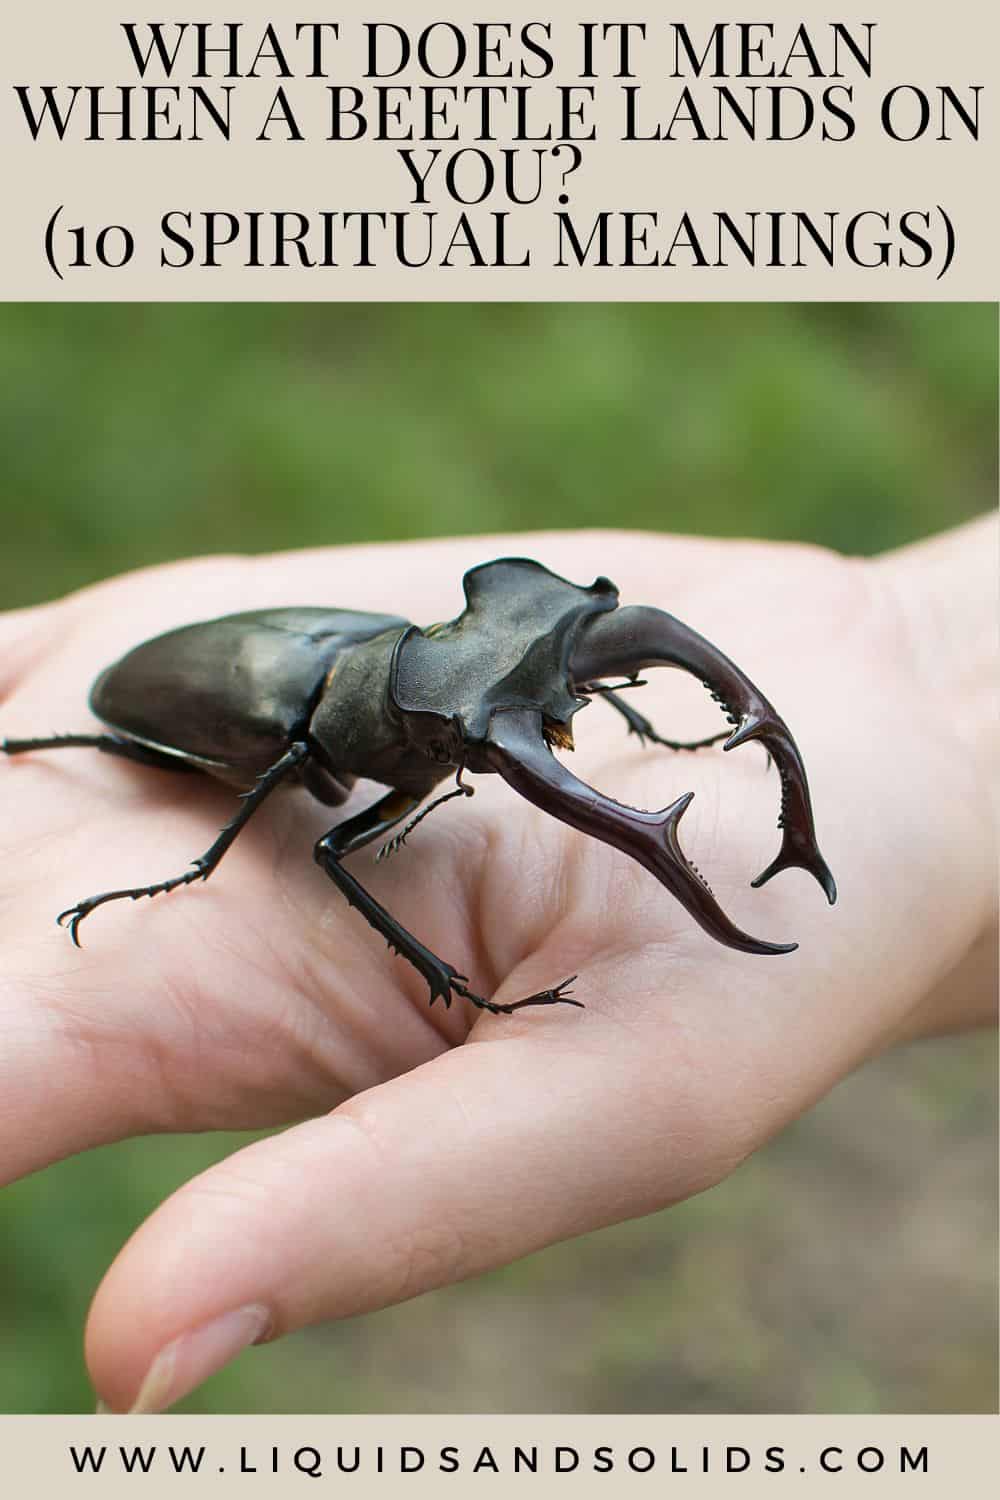 What Does It Mean When A Beetle Lands On You? (10 Spiritual Meanings)